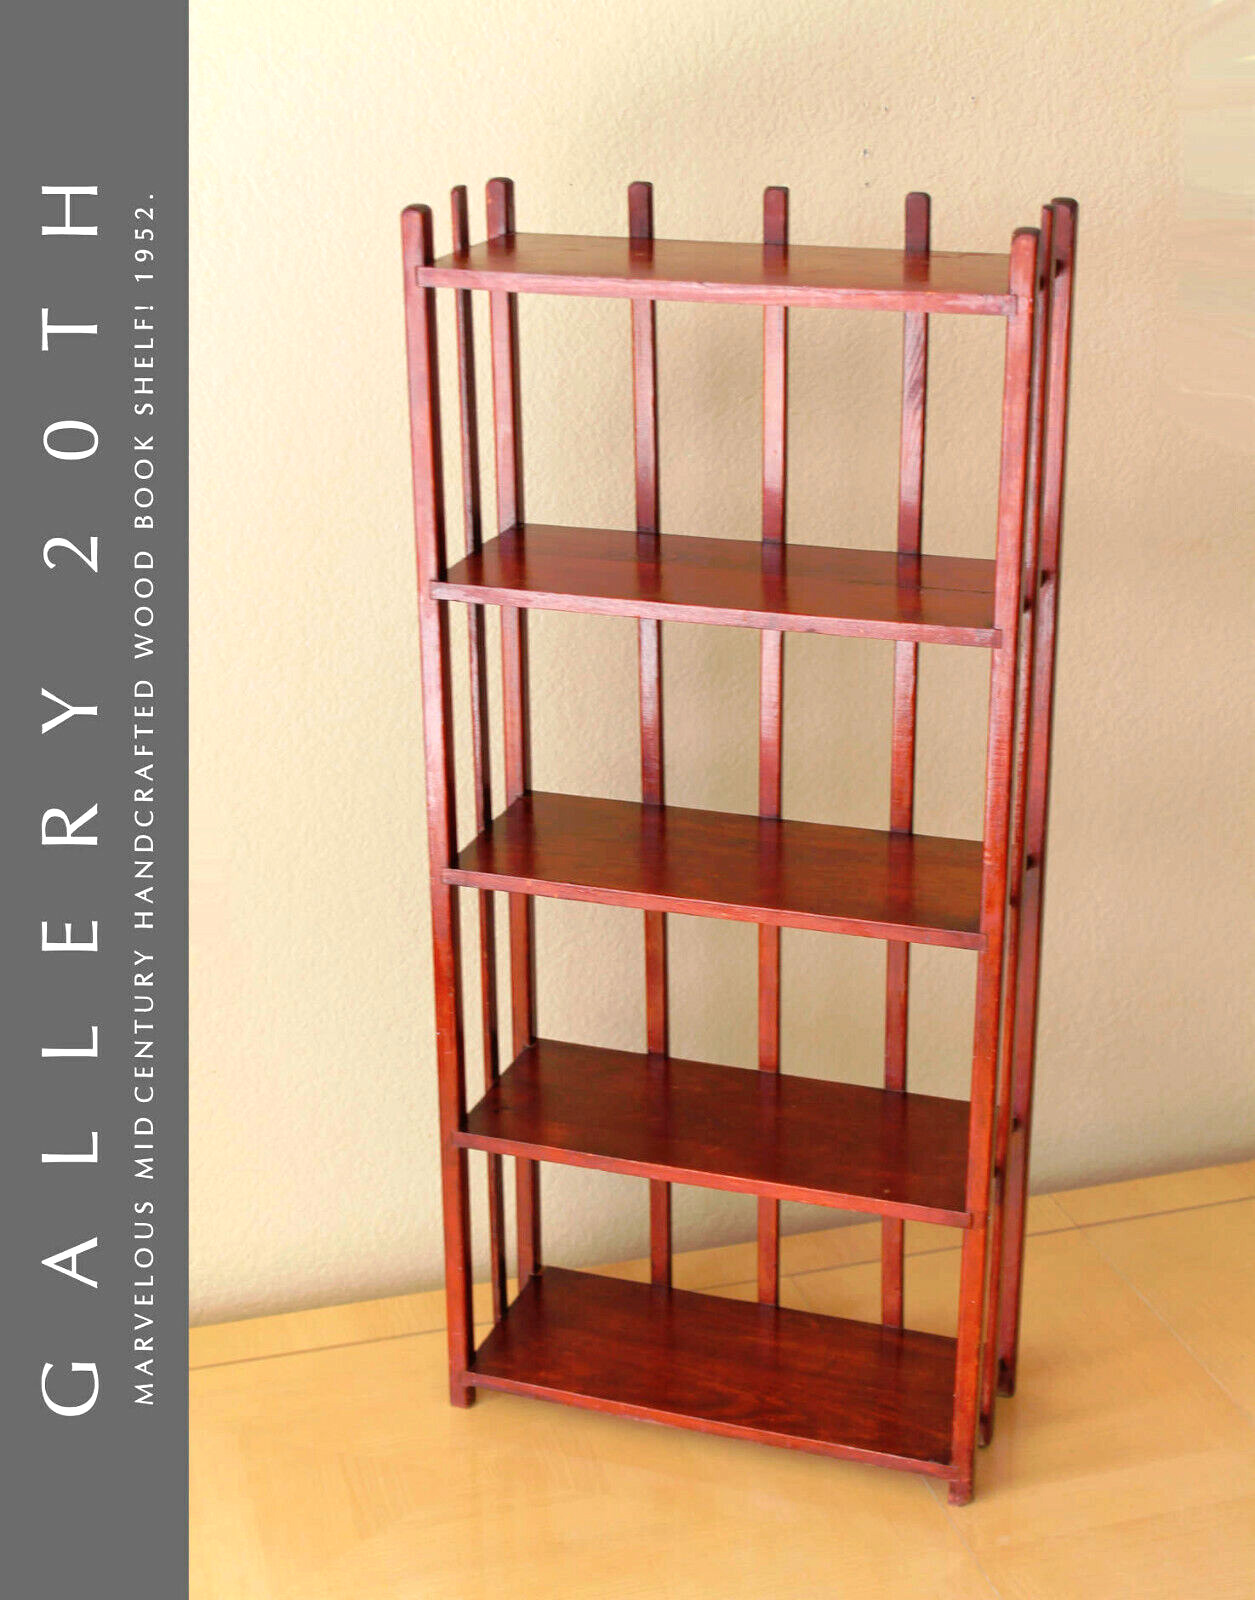 GORGEOUS MID CENTURY MODERN CHERRY STAINED HANDCRAFTED WOOD BOOK SHELF 1950S